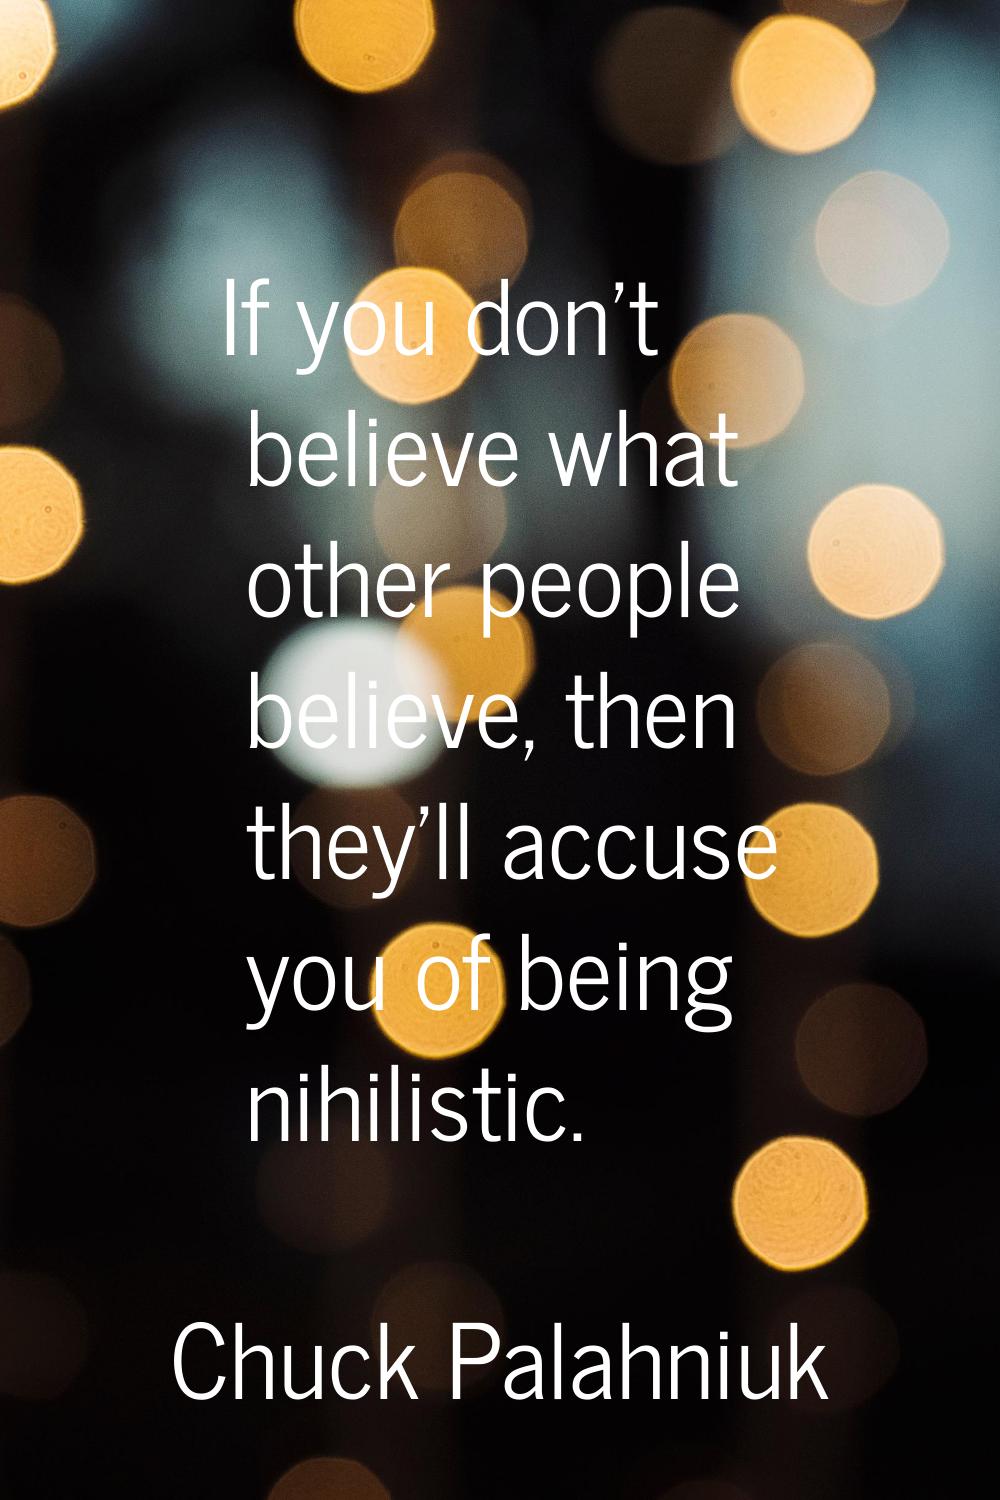 If you don't believe what other people believe, then they'll accuse you of being nihilistic.